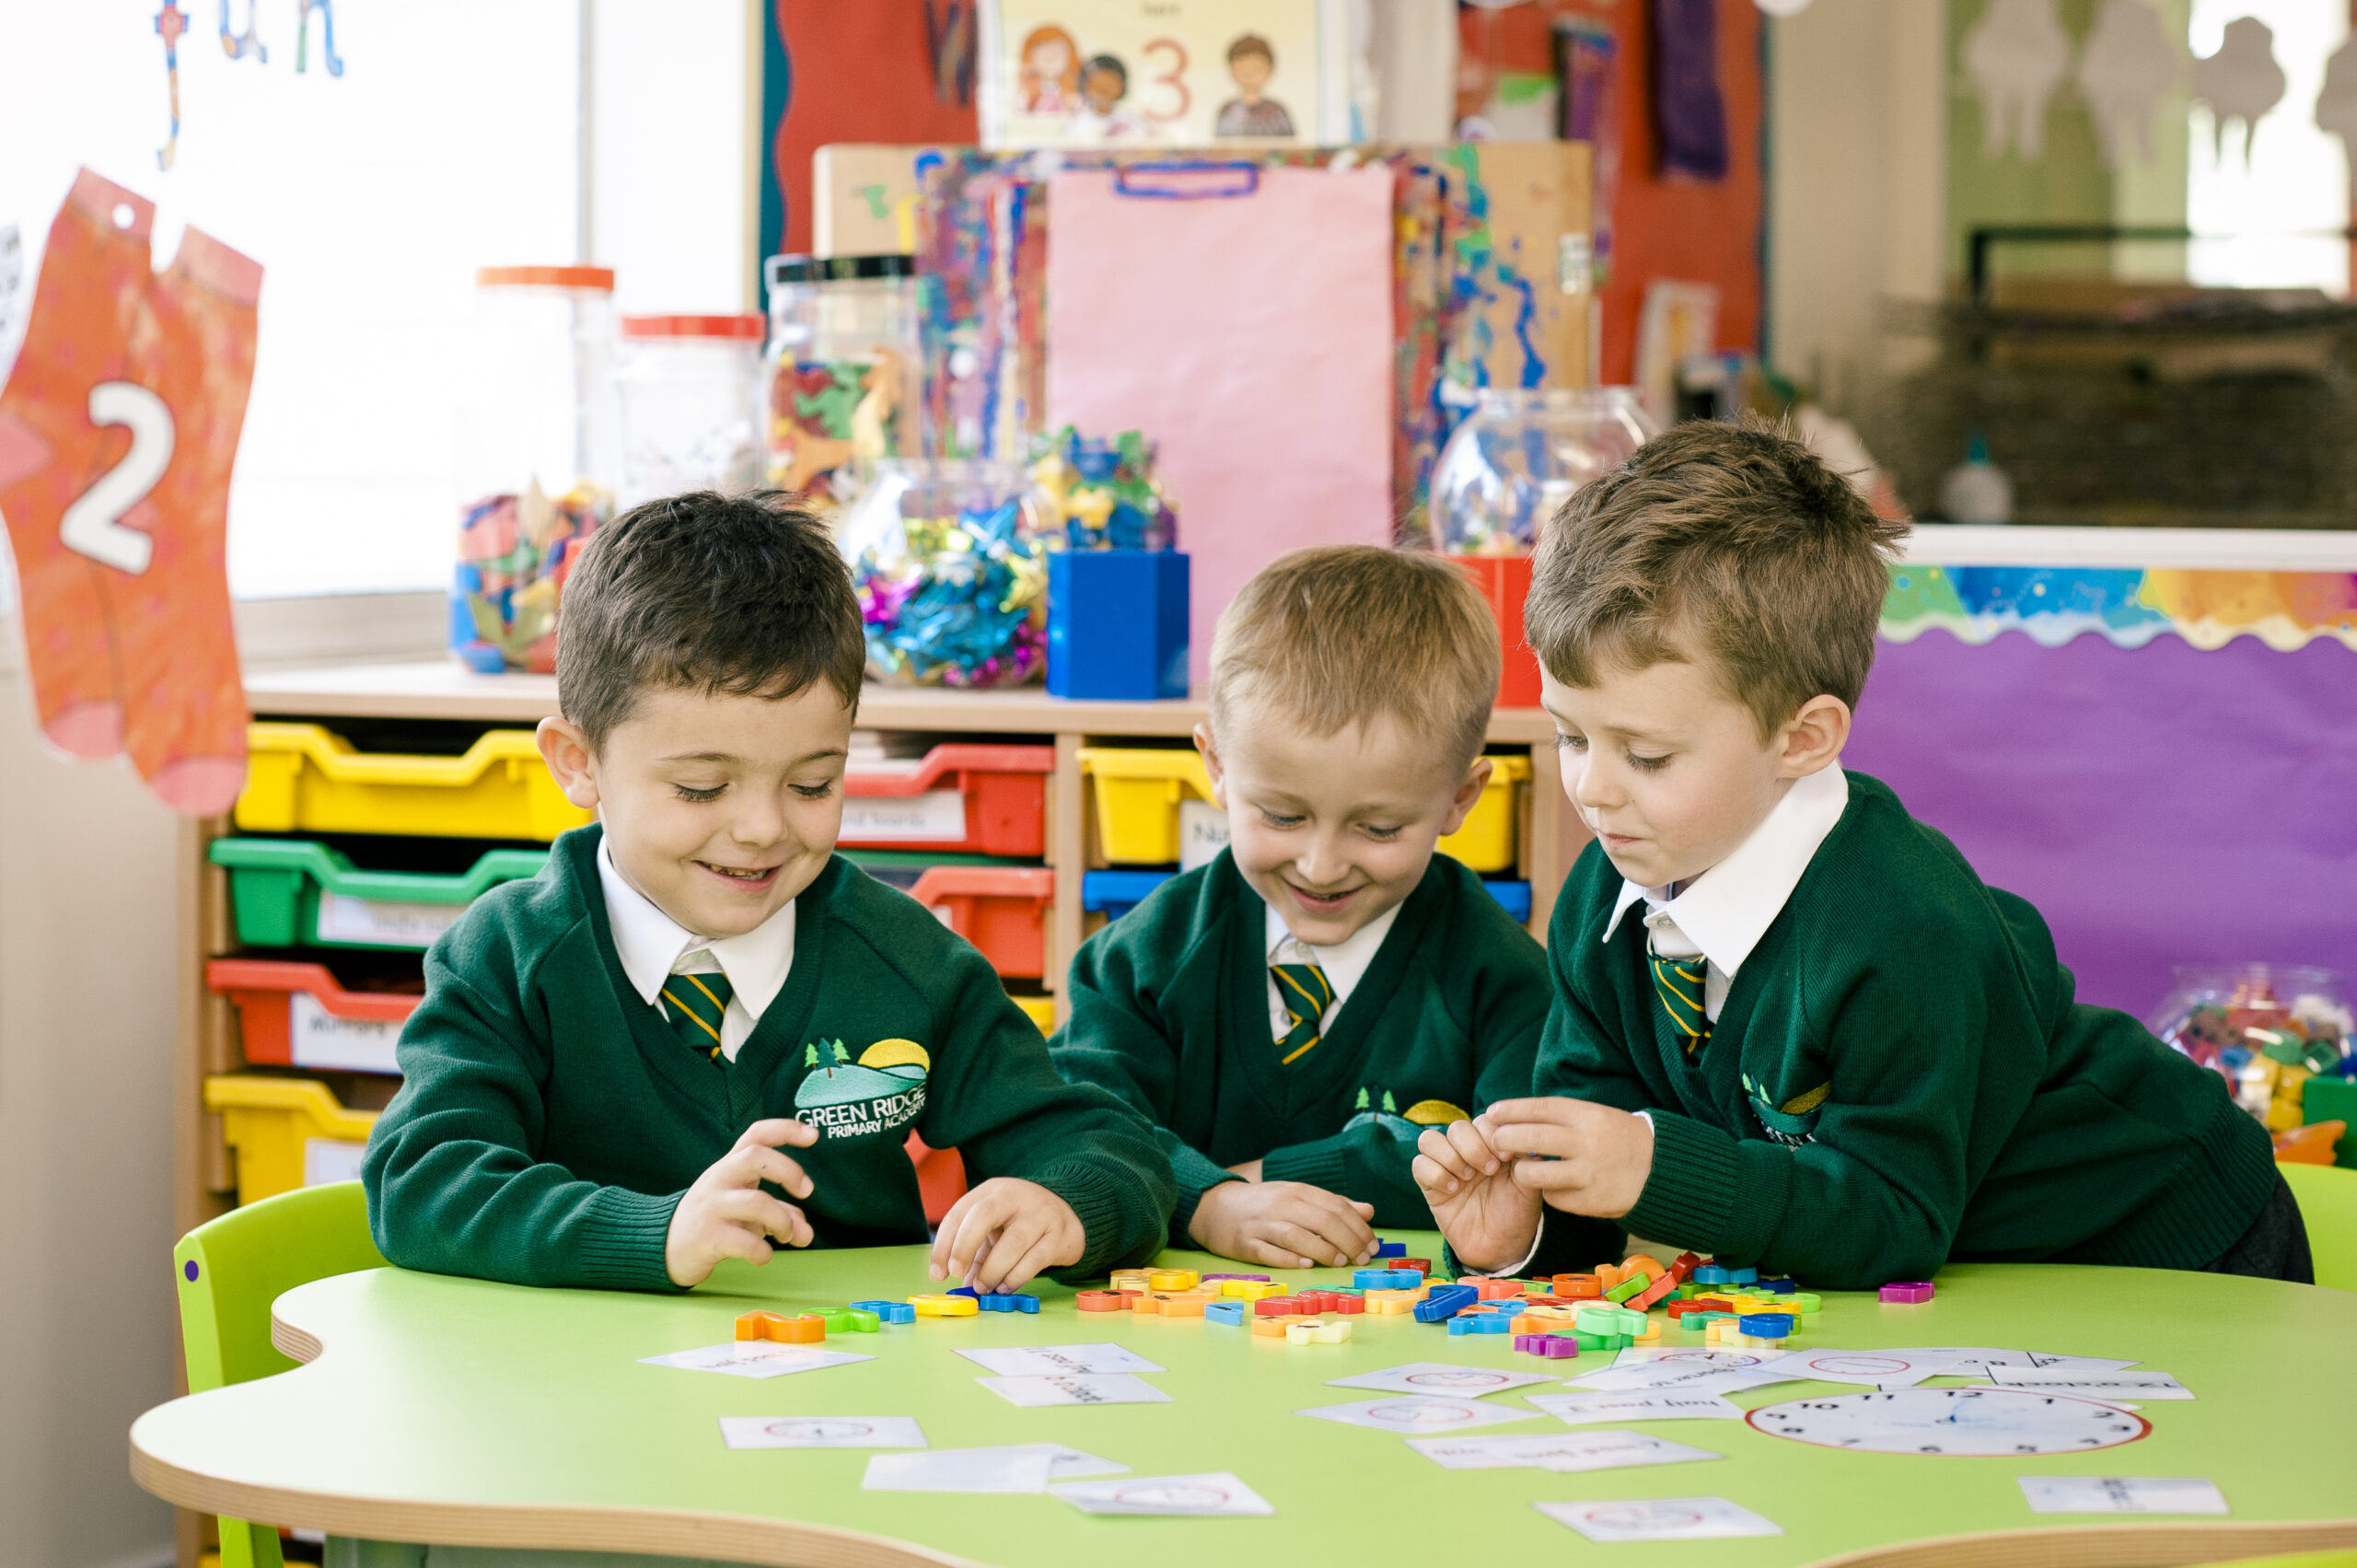 A photo of three children from Green Ridge Academy playing.